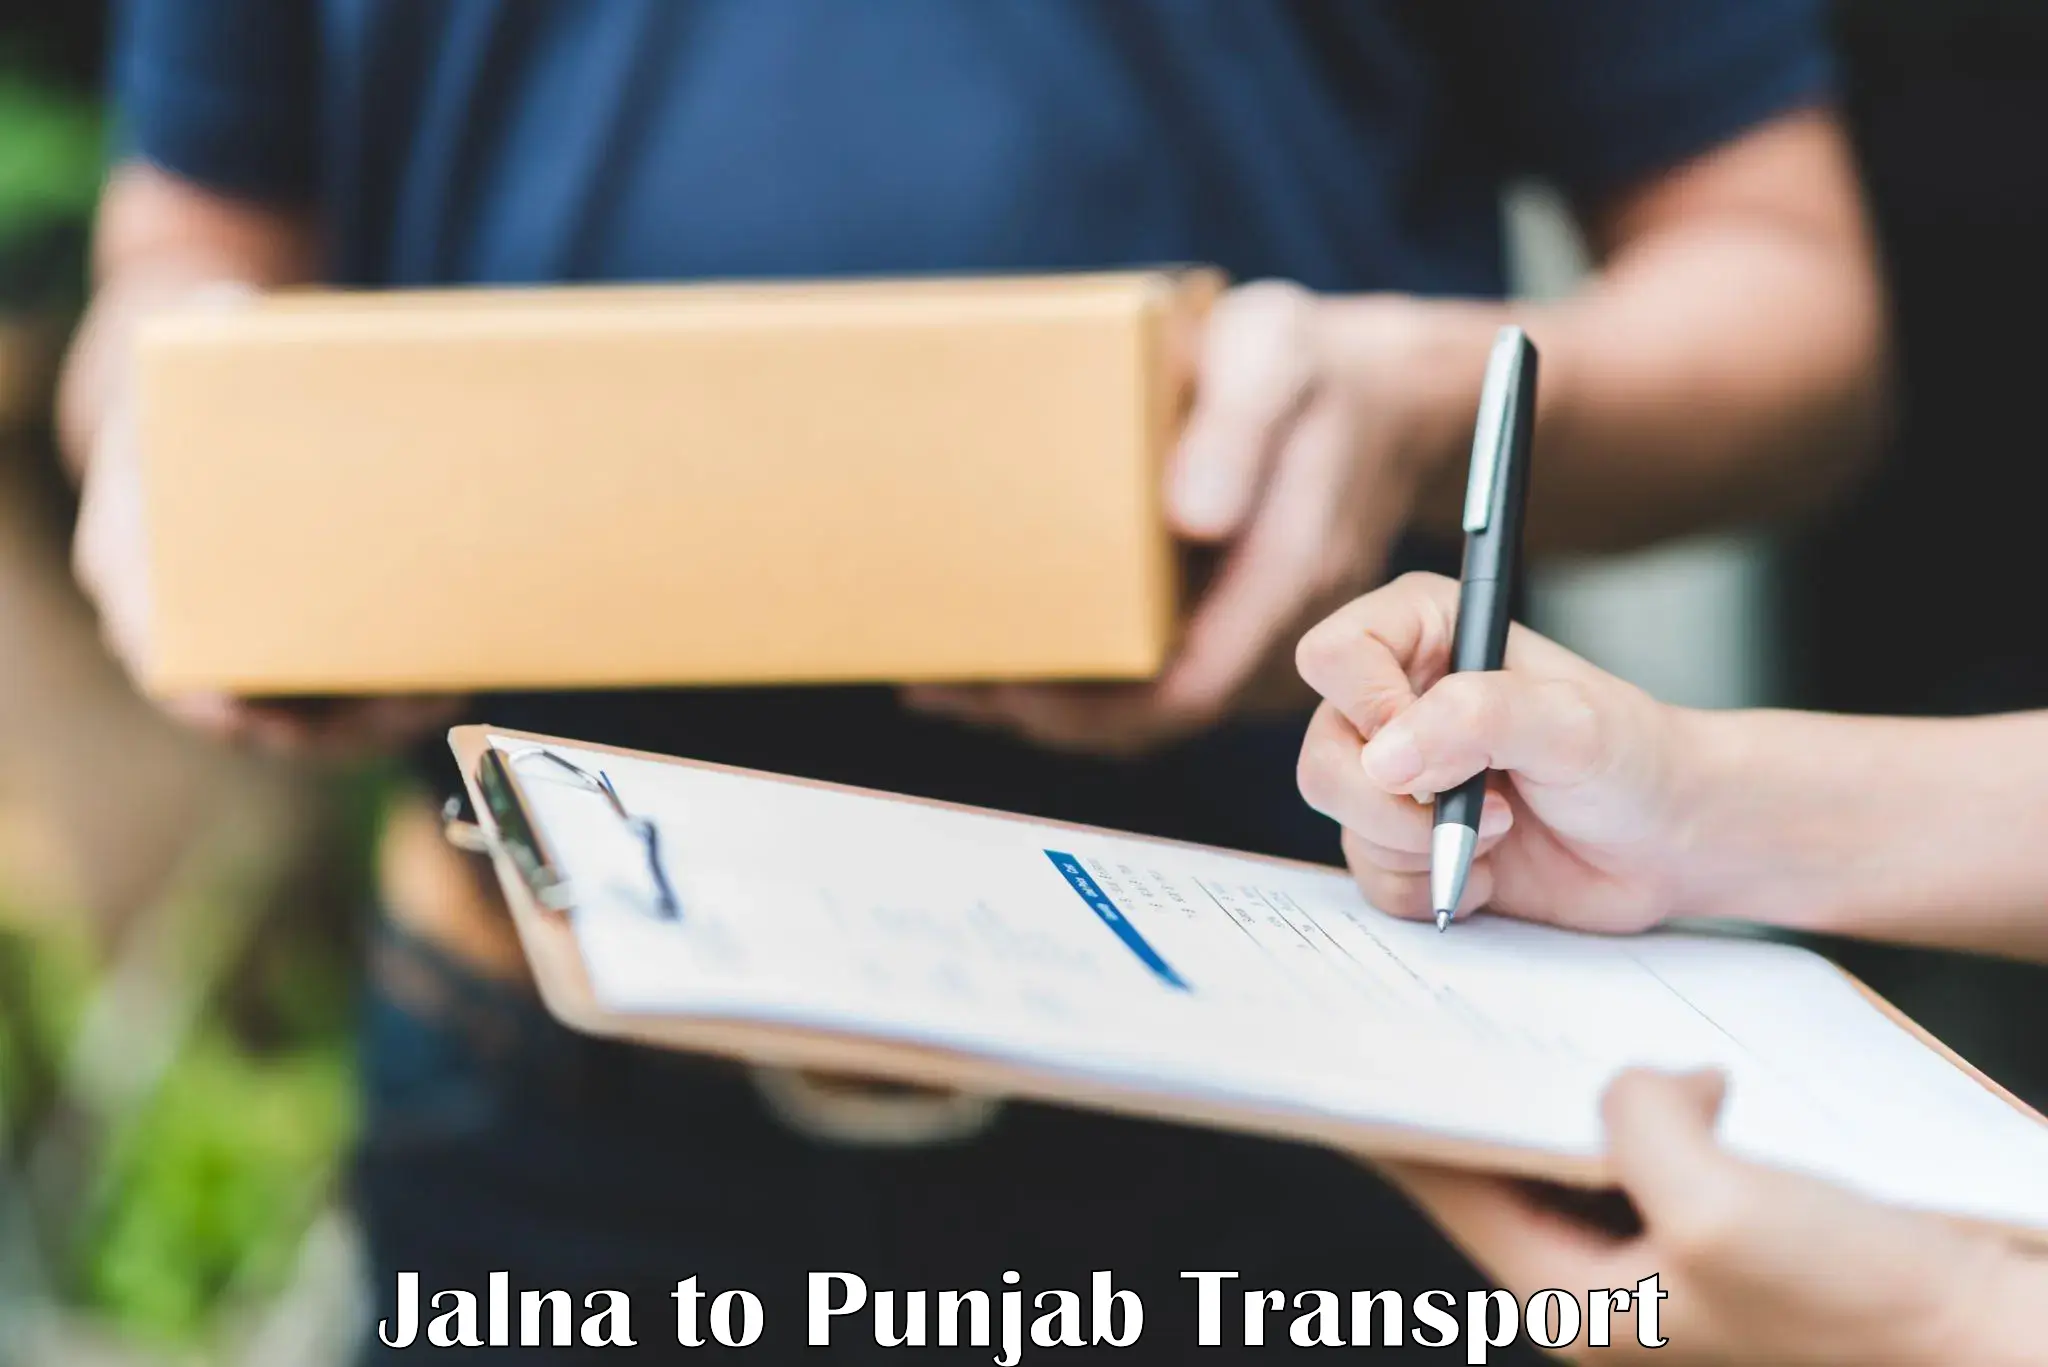 Two wheeler transport services Jalna to Malout